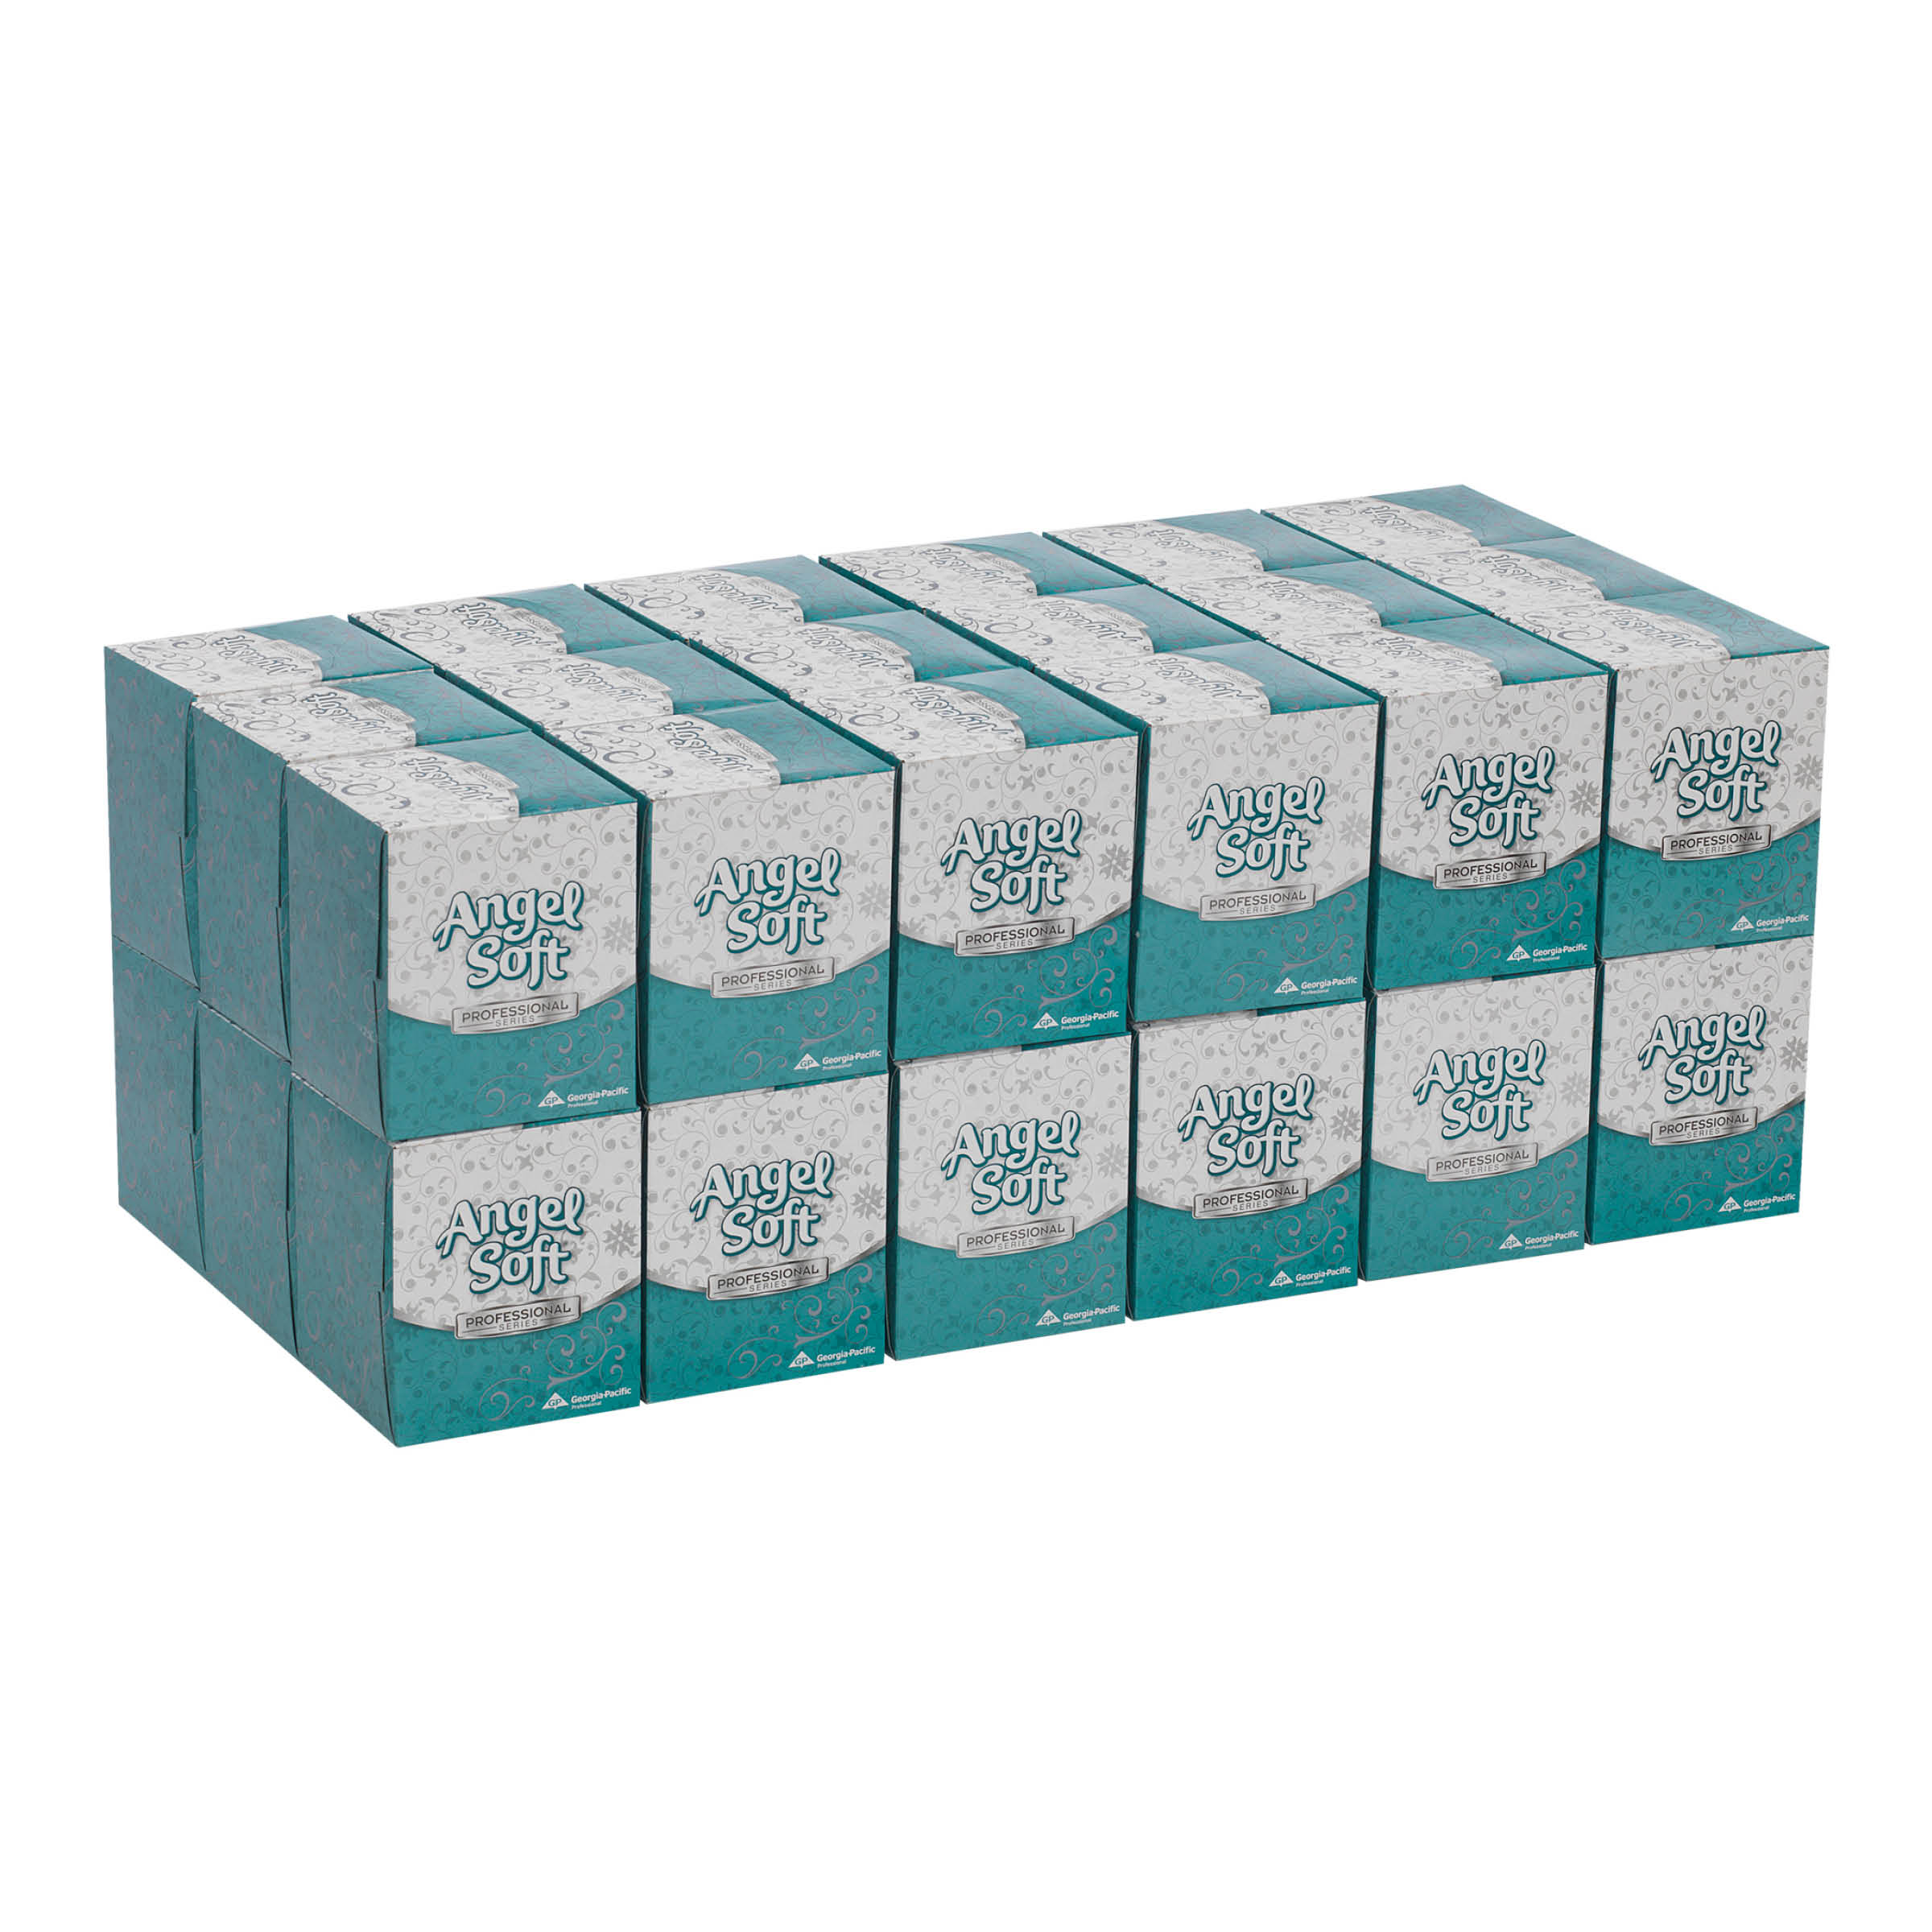 GP PRO Angel Soft Professional Series® 2-Ply Facial Tissue, Cube Box, 46580, 96 SHEETS/ BOX, 36 BOXES/CASE